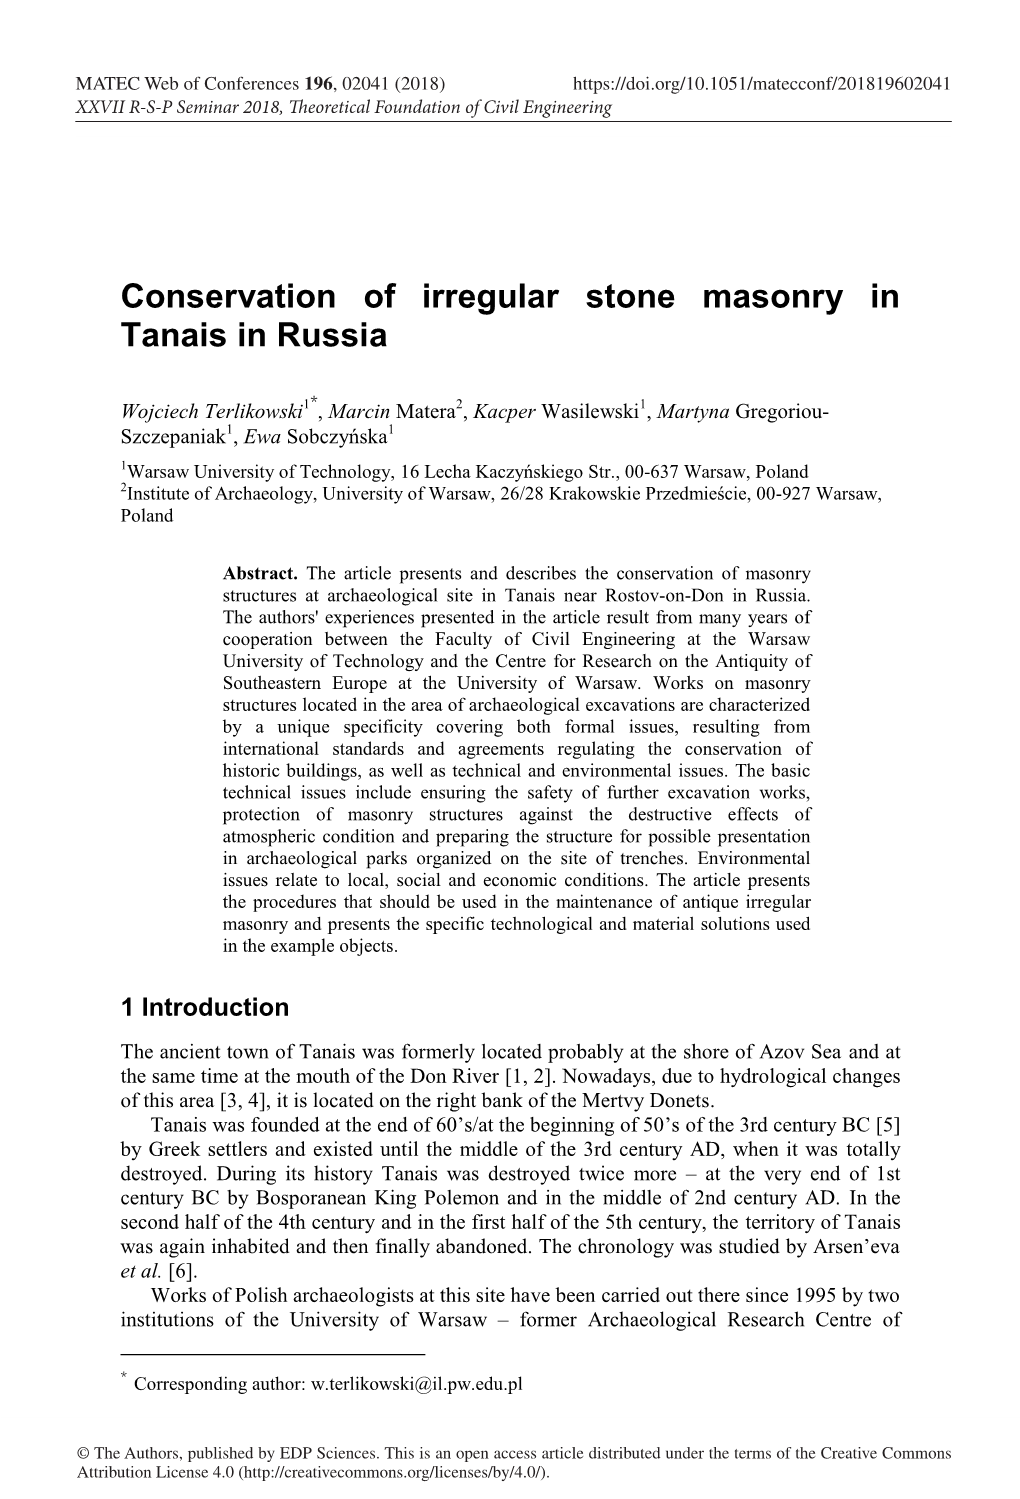 Conservation of Irregular Stone Masonry in Tanais in Russia